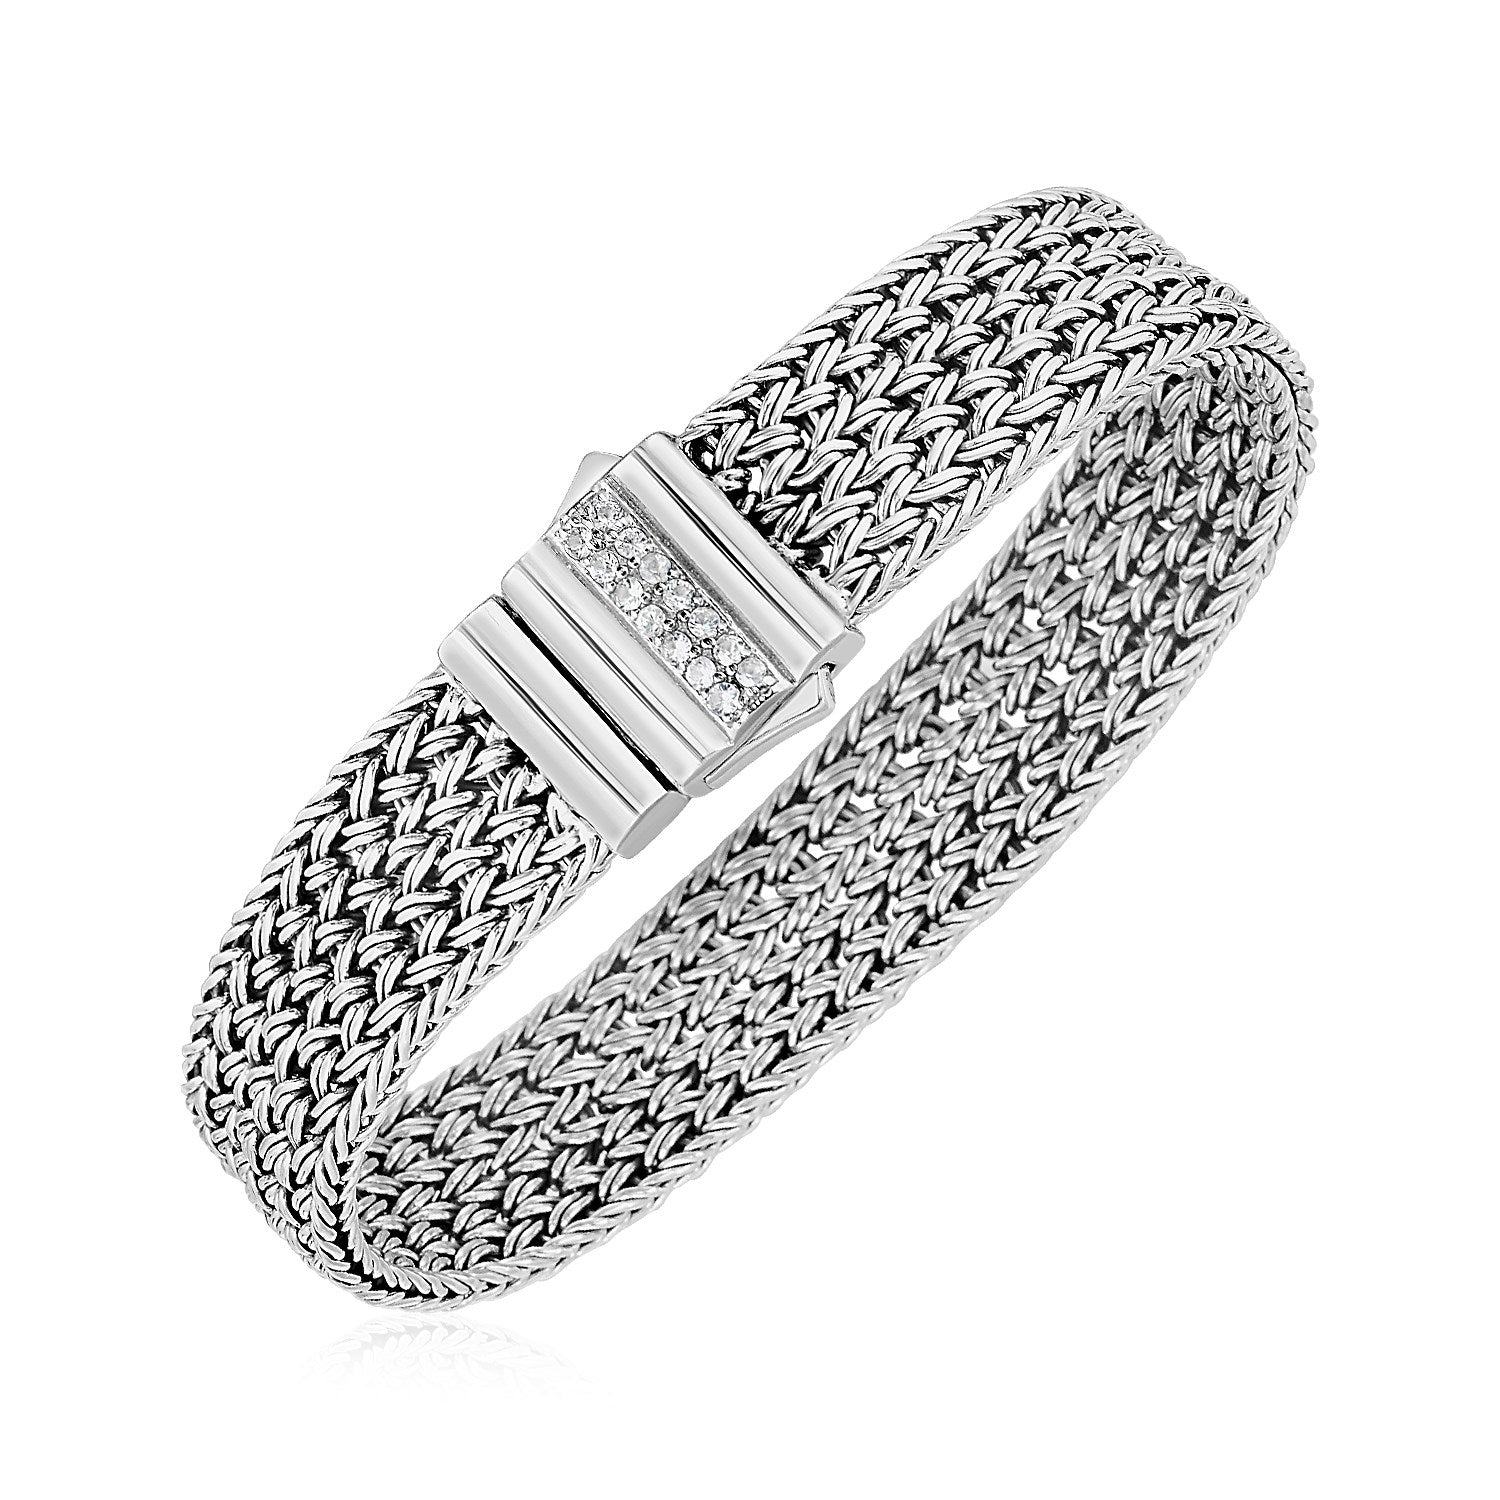 Woven Rope Bracelet With White Sapphire Accented Clasp In Sterling Silver 60936-1